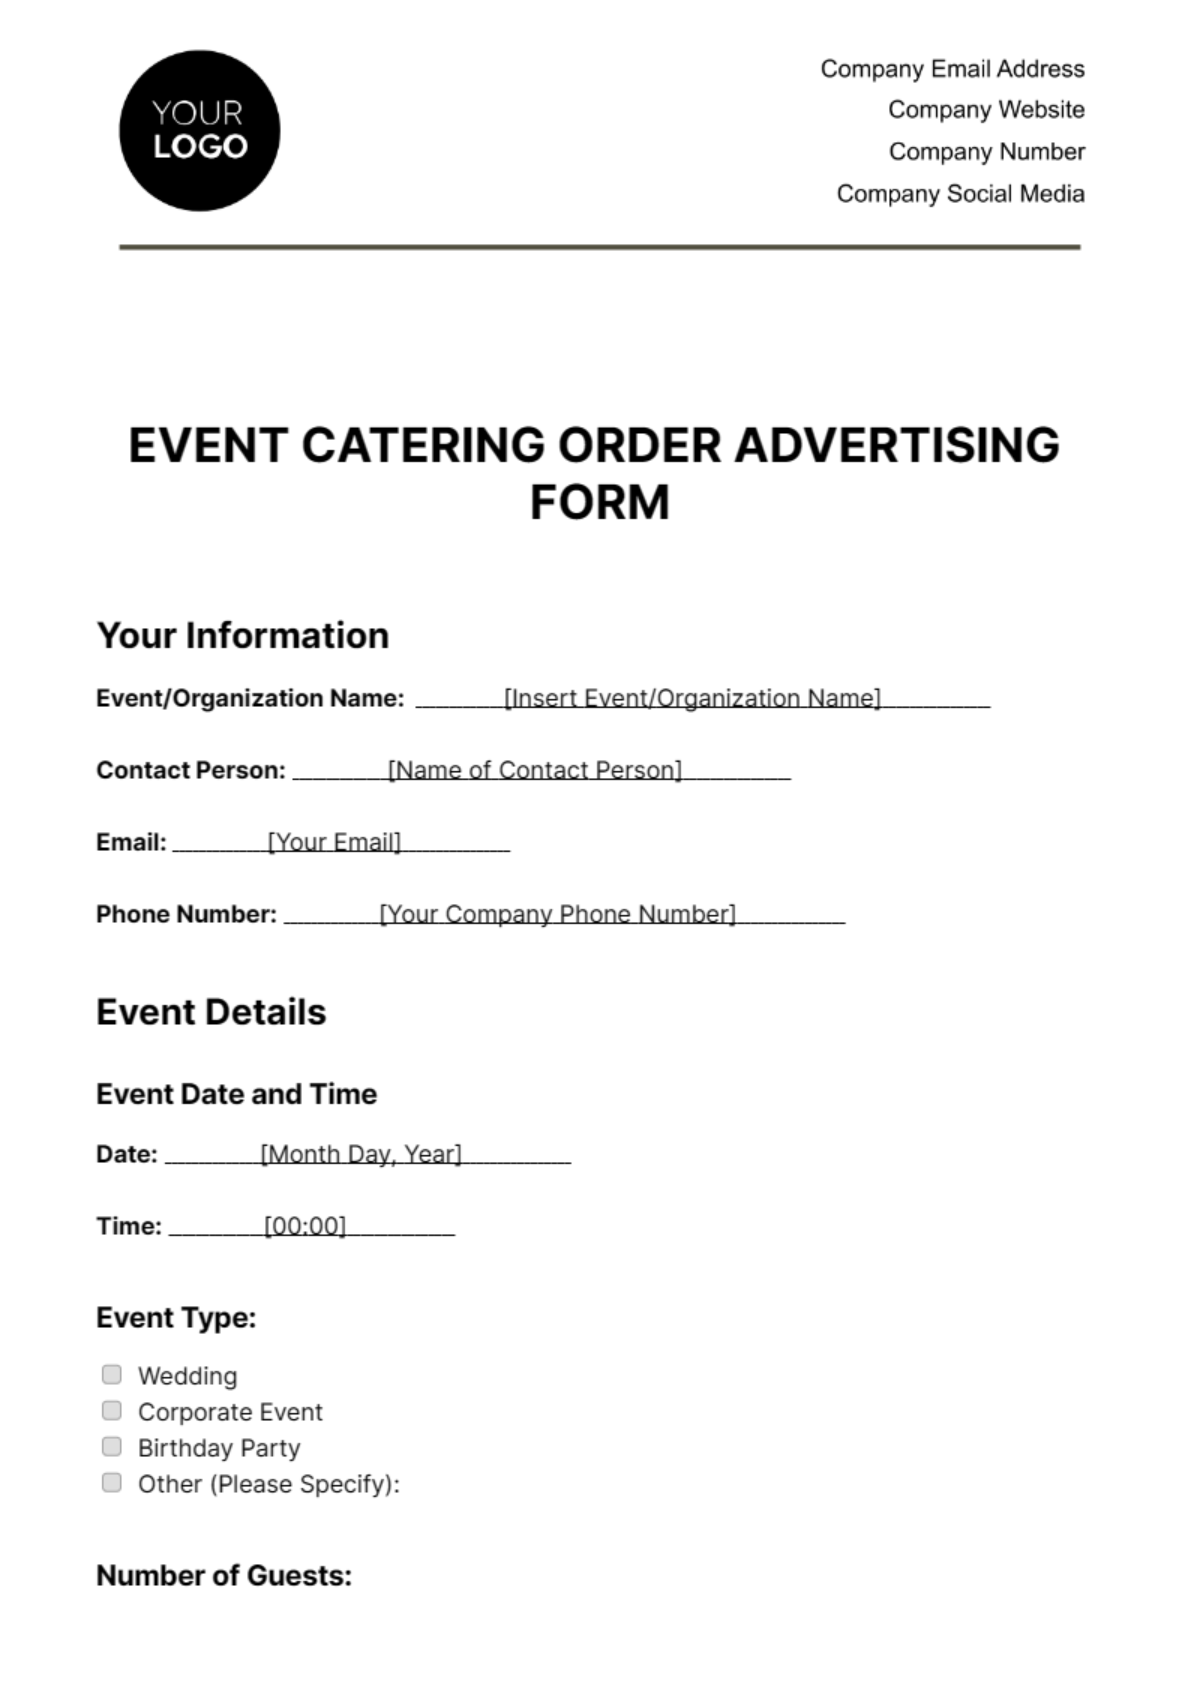 Free Event Catering Order Advertising Form Template